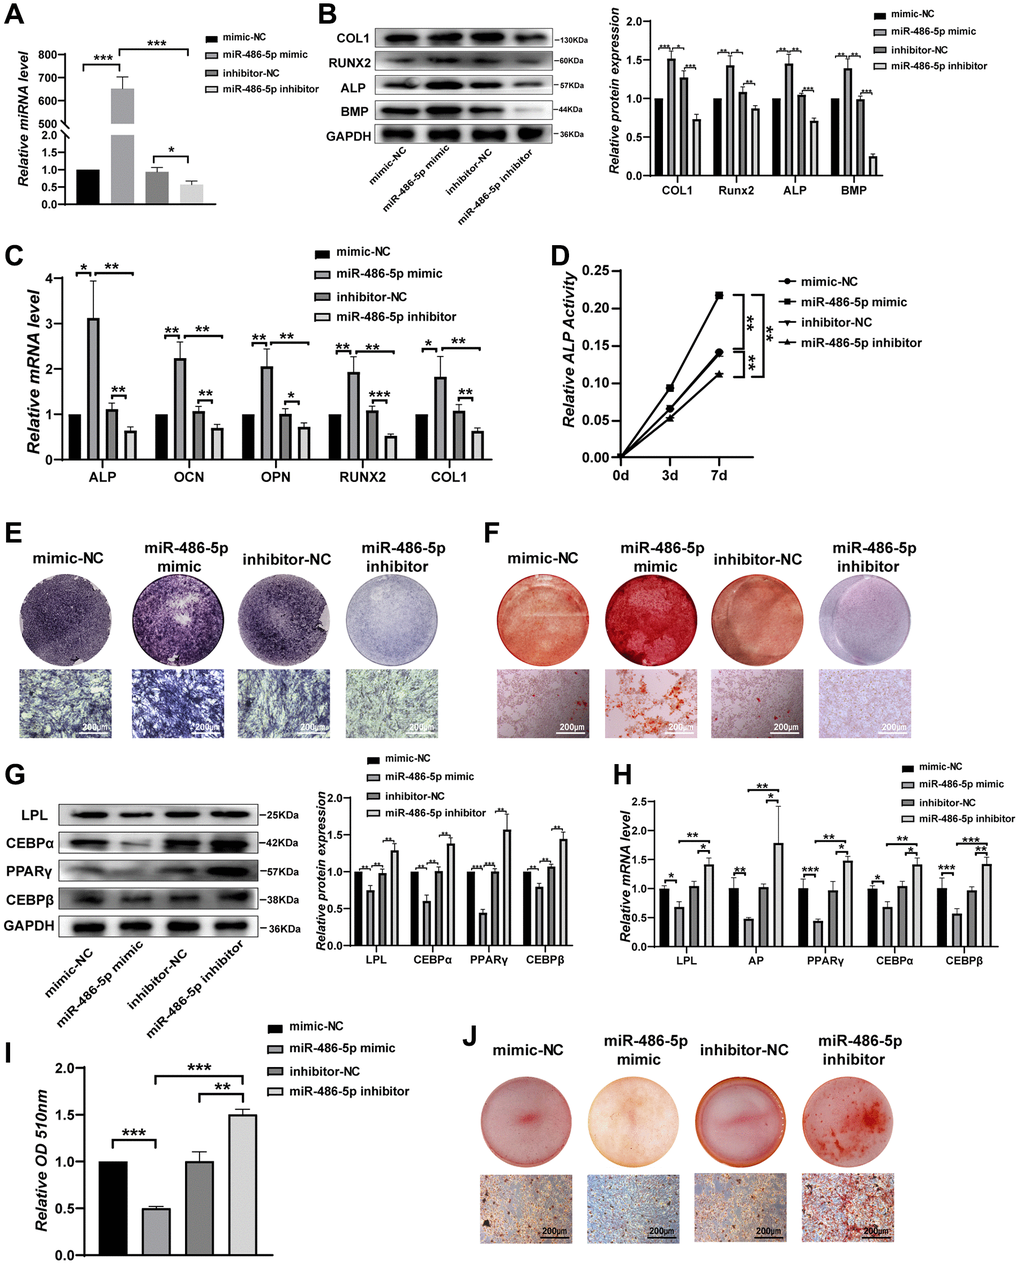 miR-486-5p directly enhances osteogenesis but suppresses adipogenesis of BMMSCs. (A) qRT-PCR analysis of miR-486-5p levels in BMMSCs after treatment with mimic-NC, miR-486-5p mimic, inhibitor-NC, or miR-486-5p inhibitor for 48 h. (B) Western blot analysis of COL1, RUNX2, ALP, and BMP in BMMSCs after treatment with mimic-NC, miR-486-5p mimic, inhibitor-NC, or miR-486-5p inhibitor for 48 h. (C) qRT-PCR analysis of the changes in the mRNA levels of the osteogenic differentiation marker genes ALP, OCN, OPN, RUNX2, and COL1 in BMMSCs after treatment with mimic-NC, miR-486-5p mimic, inhibitor-NC, or miR-486-5p inhibitor for 48 h. (D) Relative ALP activity was analysed during osteogenesis in treated BMMSCs on days 0, 3, and 7. (E) ALP staining in BMMSCs following different treatments for 14 days. Scale bars, 200 μm. (F) Alizarin red staining in BMMSCs after different transfections for 21 days. Scale bars, 200 μm. (G, H) The expression of adipogenic-specific markers was analysed by qRT-PCR and Western blots. (I, J) Oil red O staining and extraction were performed to detect lipid droplet formation on day 10. Scale bars, 200 μm. Data are expressed as the mean ± SEM, *p **p ***p 